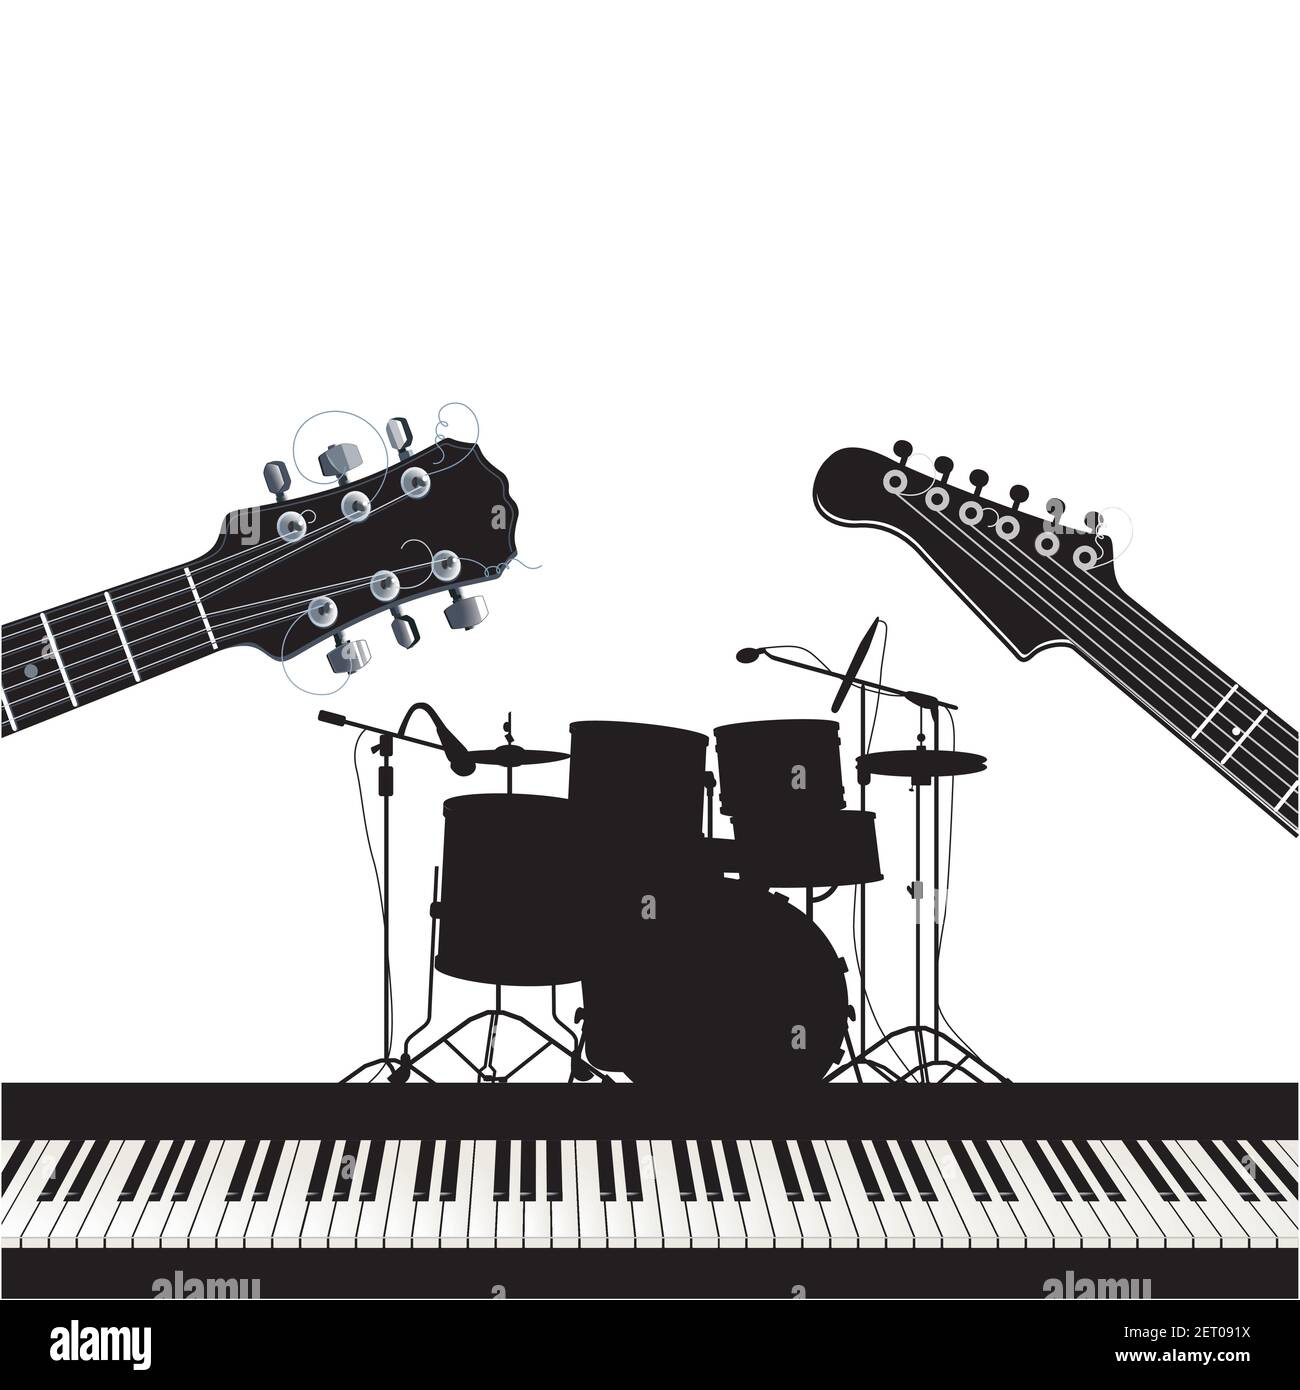 Musical instruments, guitars, drums and piano, rock music Stock Vector